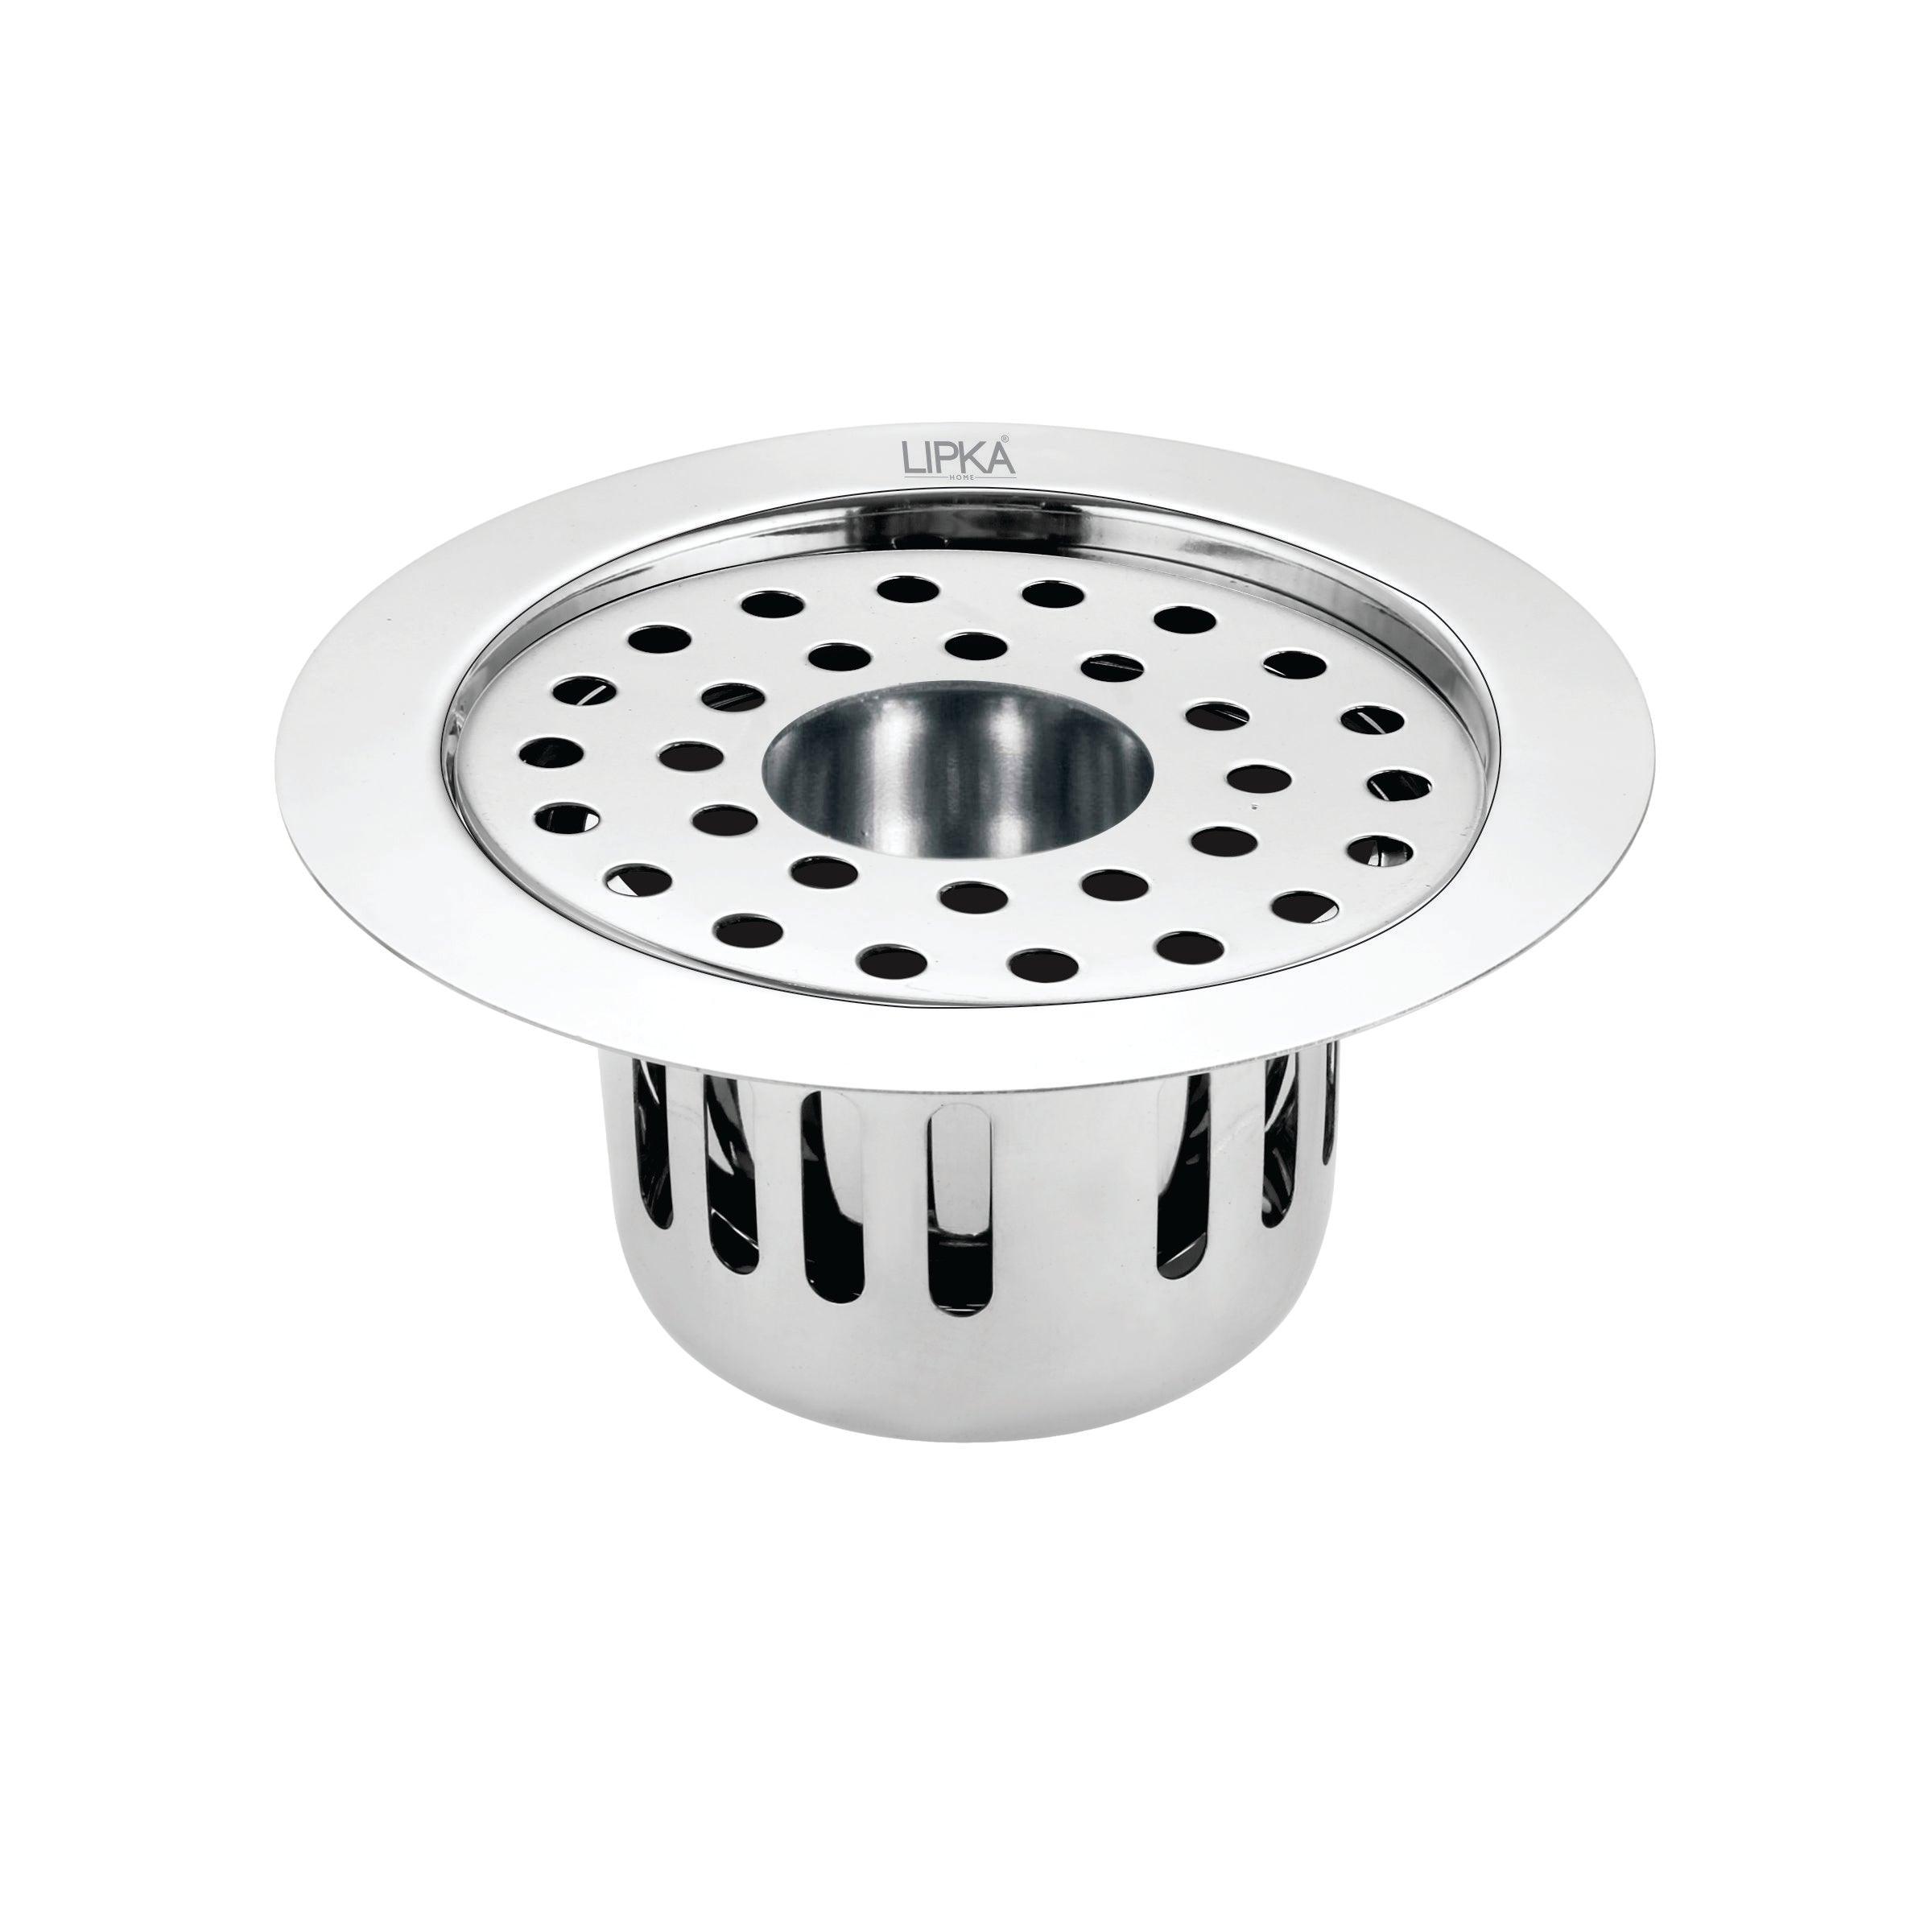 Round Flat Cut Floor Drain (5.5 inches) with Cockroach Trap & Hole